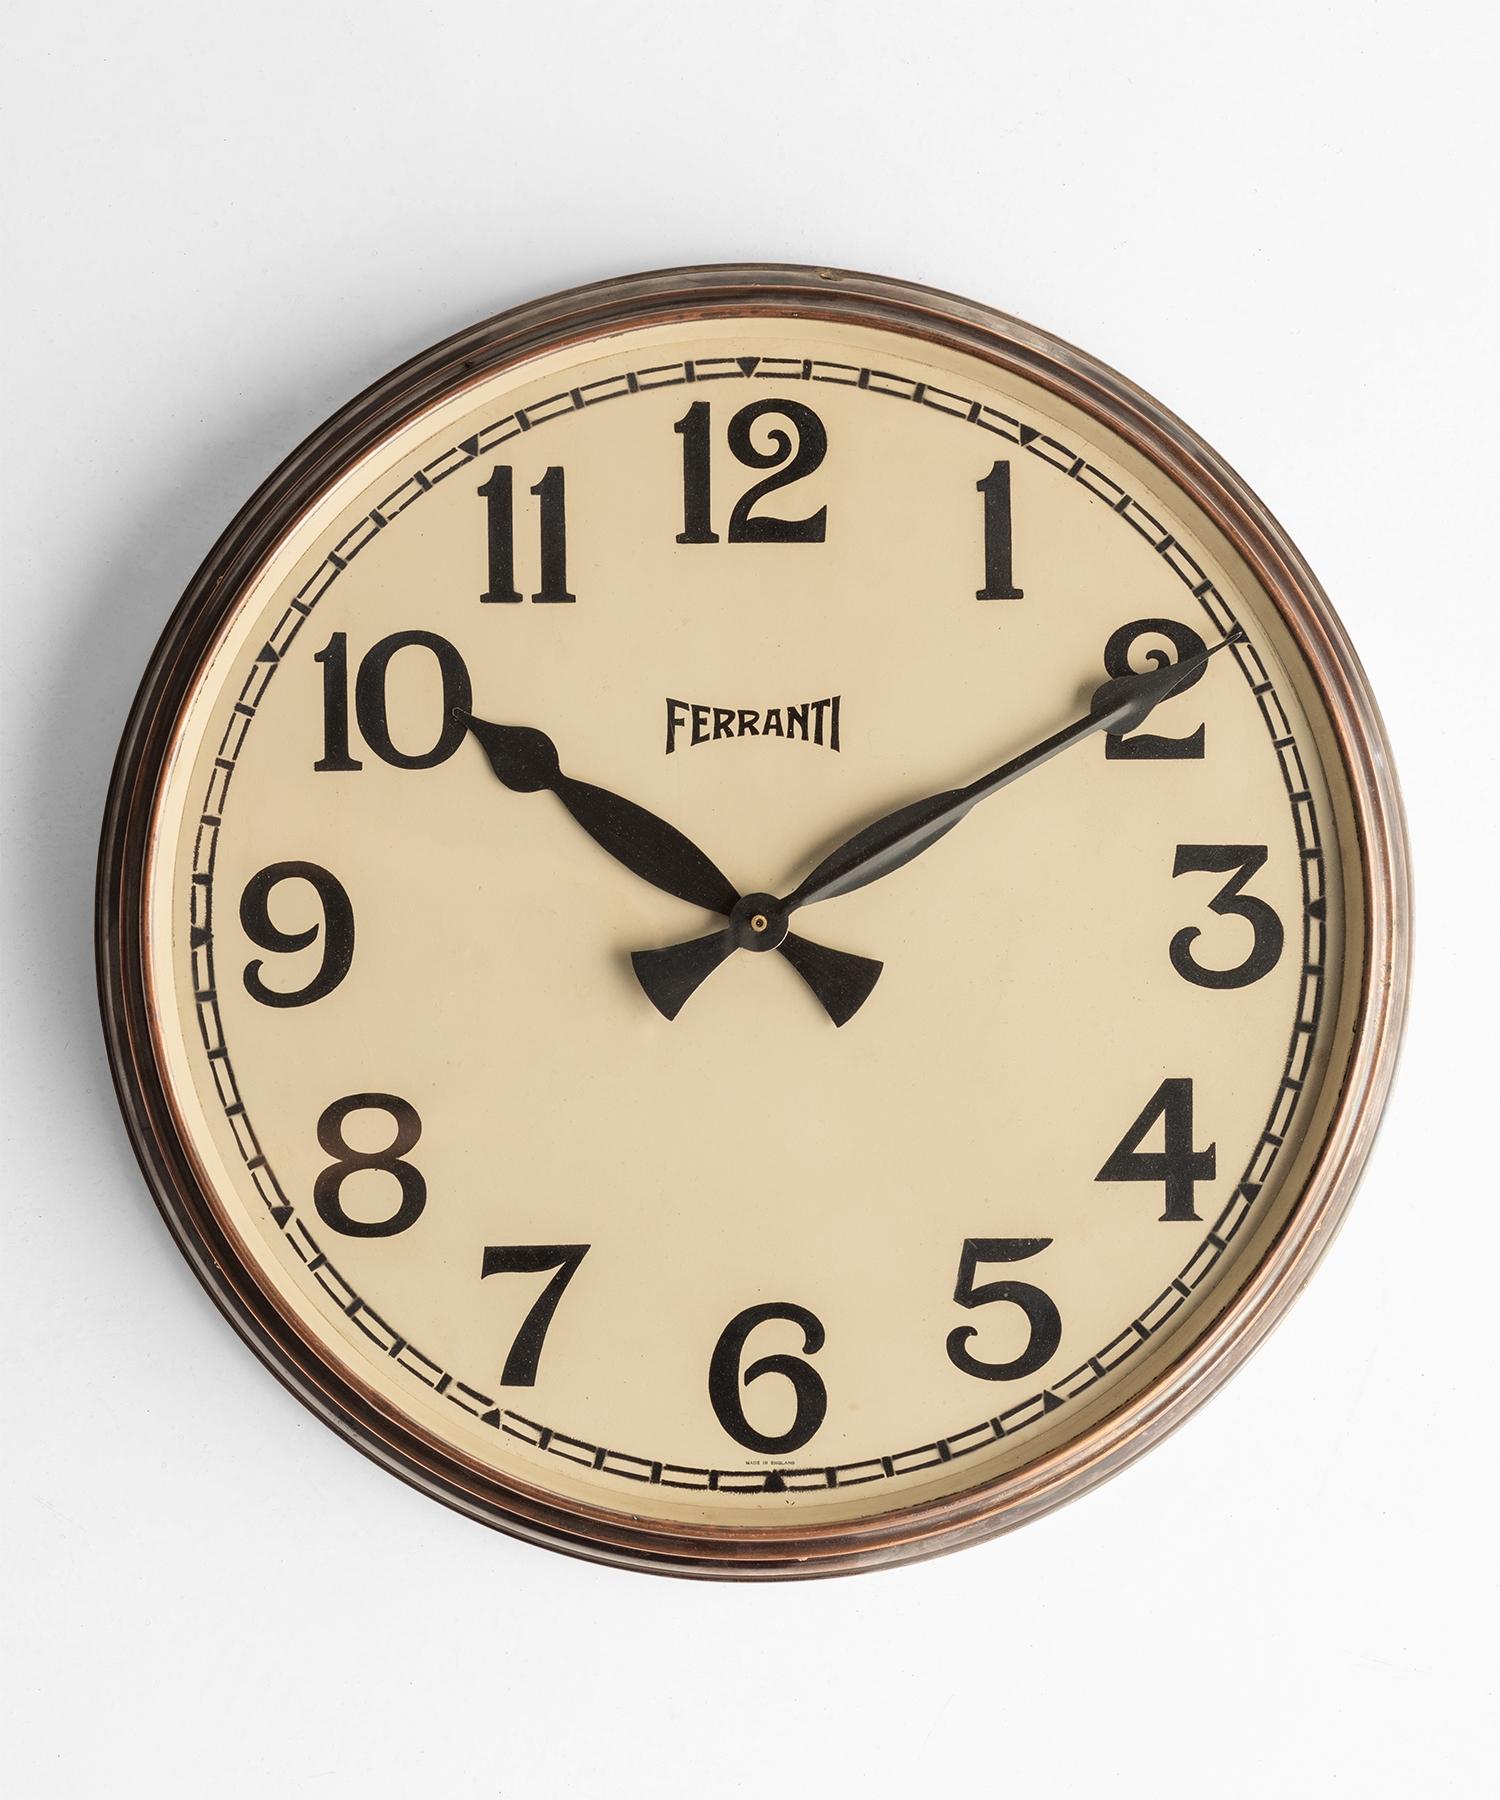 Factory clock by Ferranti, England, circa 1920.

Original hands with hand painted dial in period copper frame. Newly powered by quartz movement.